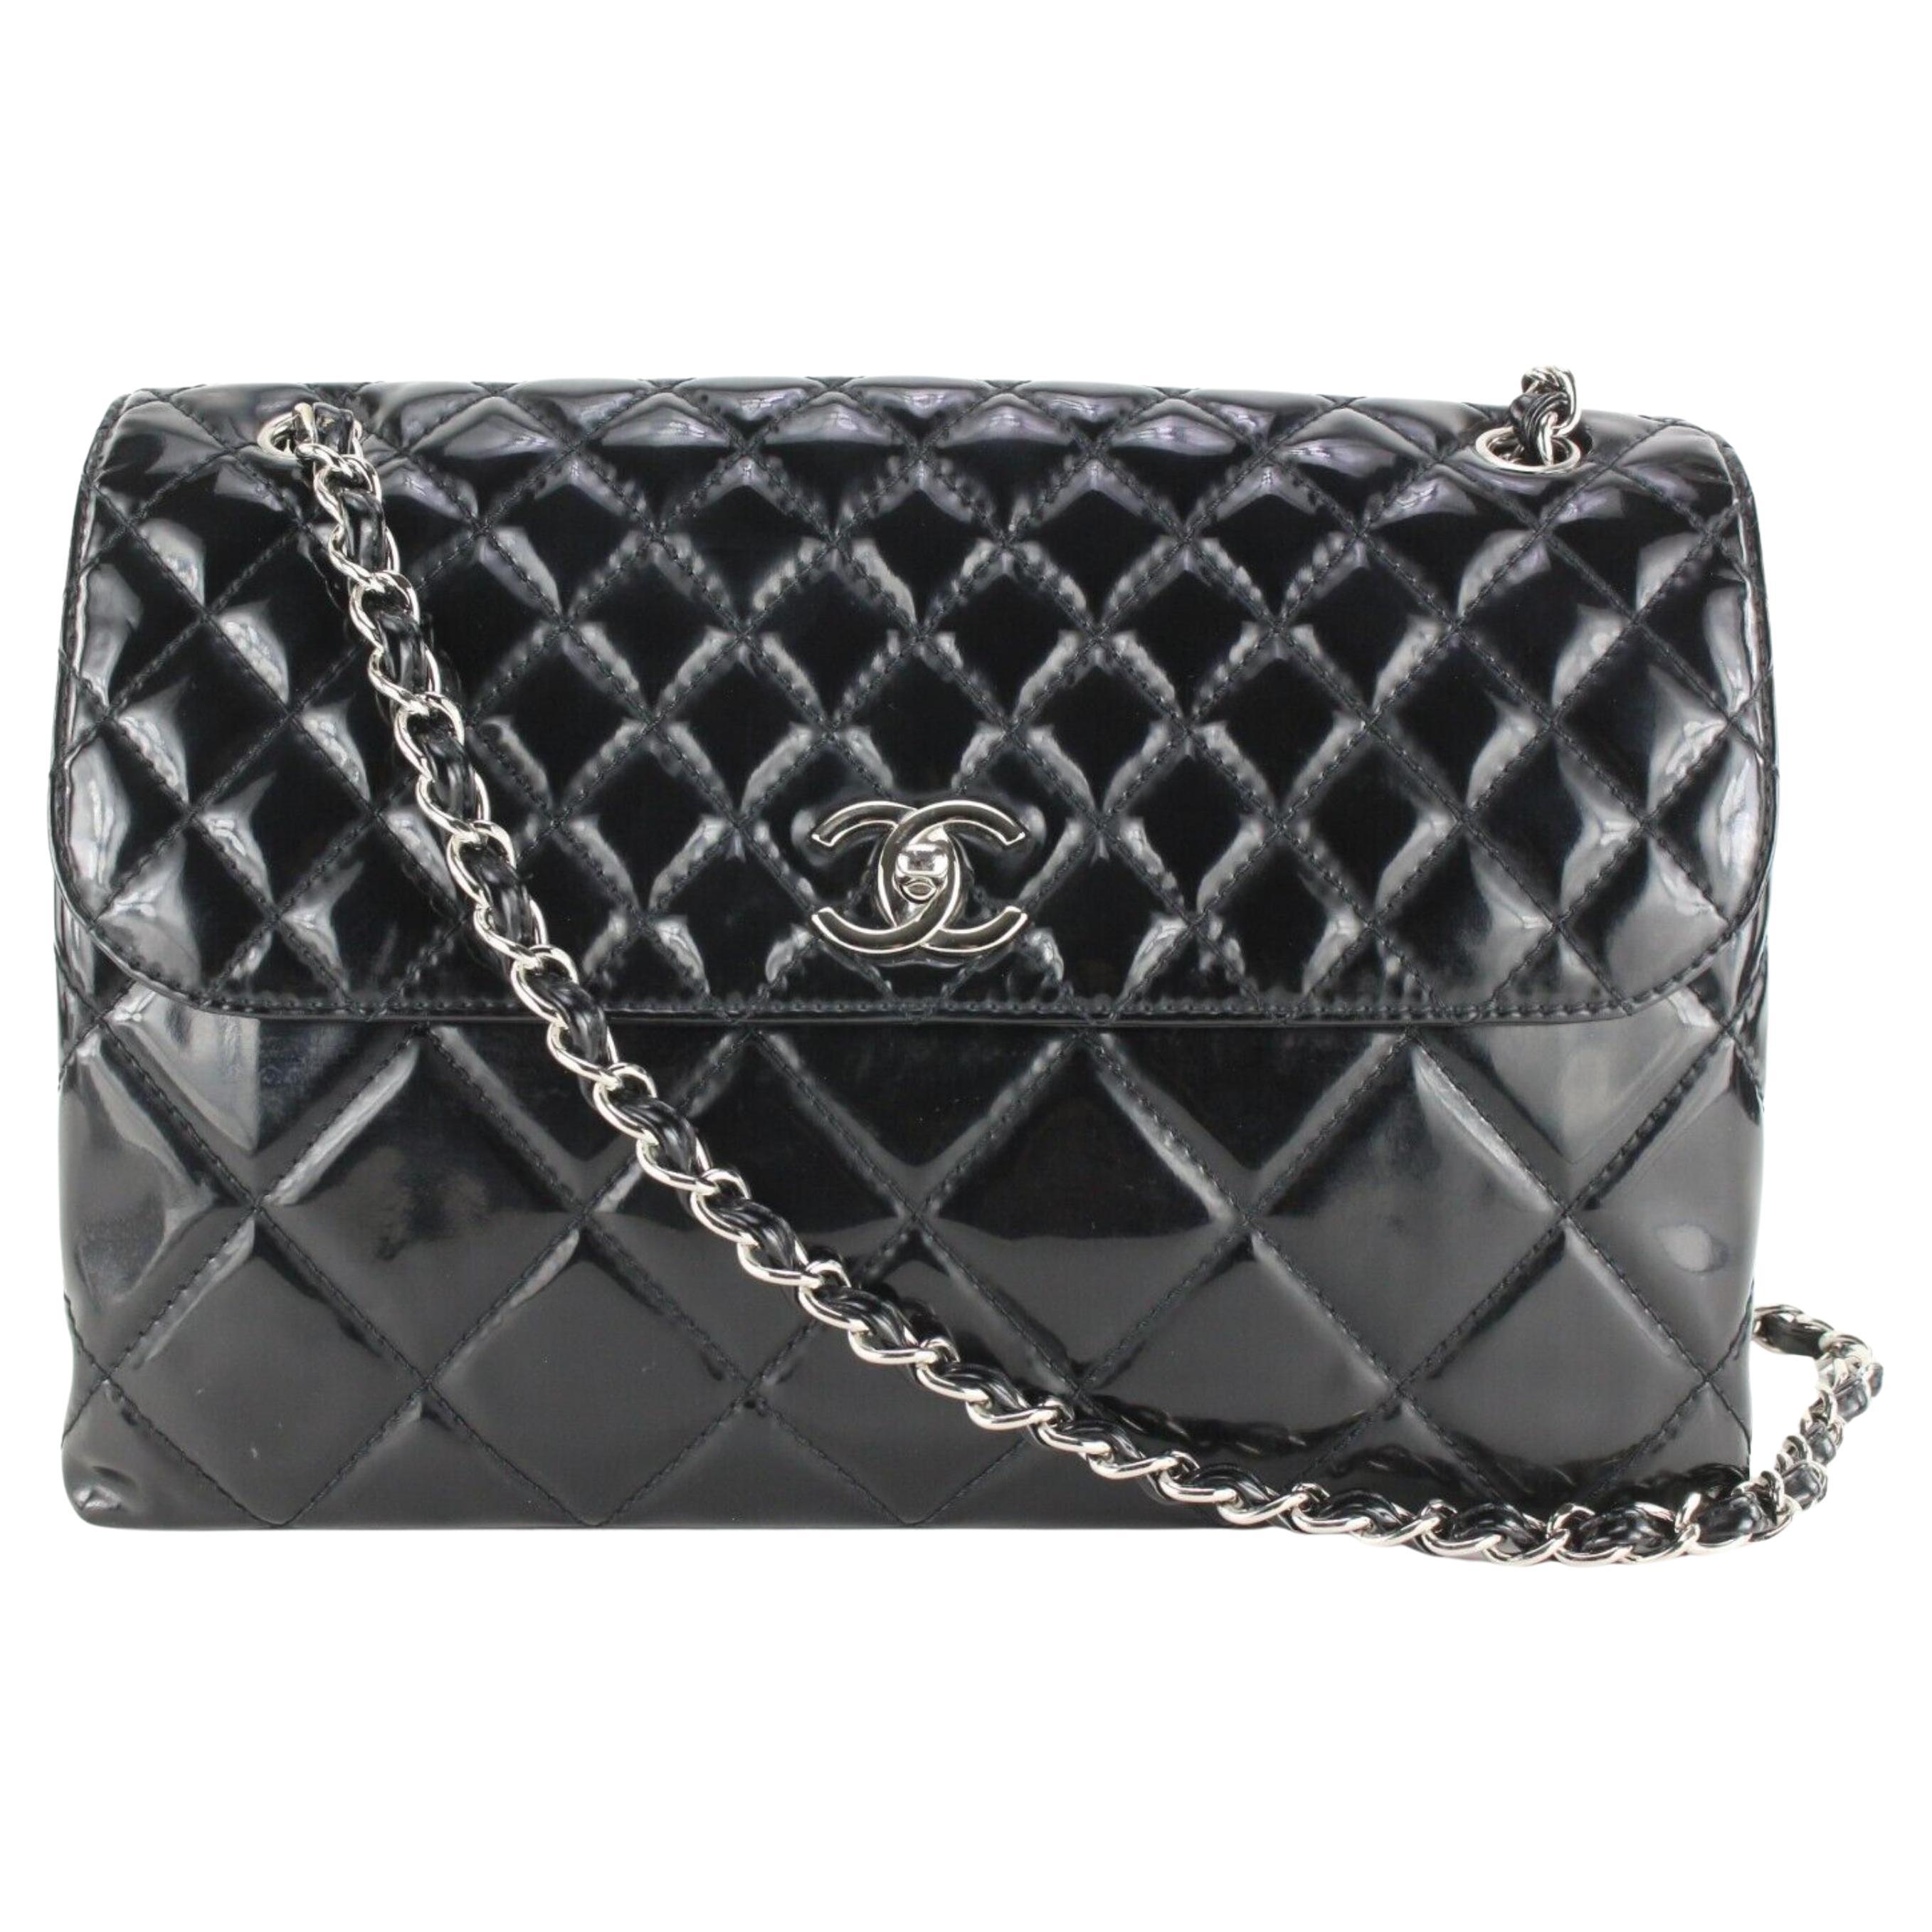 Chanel Black Quilted Patent Jumbo Flap SHW 89c26a For Sale